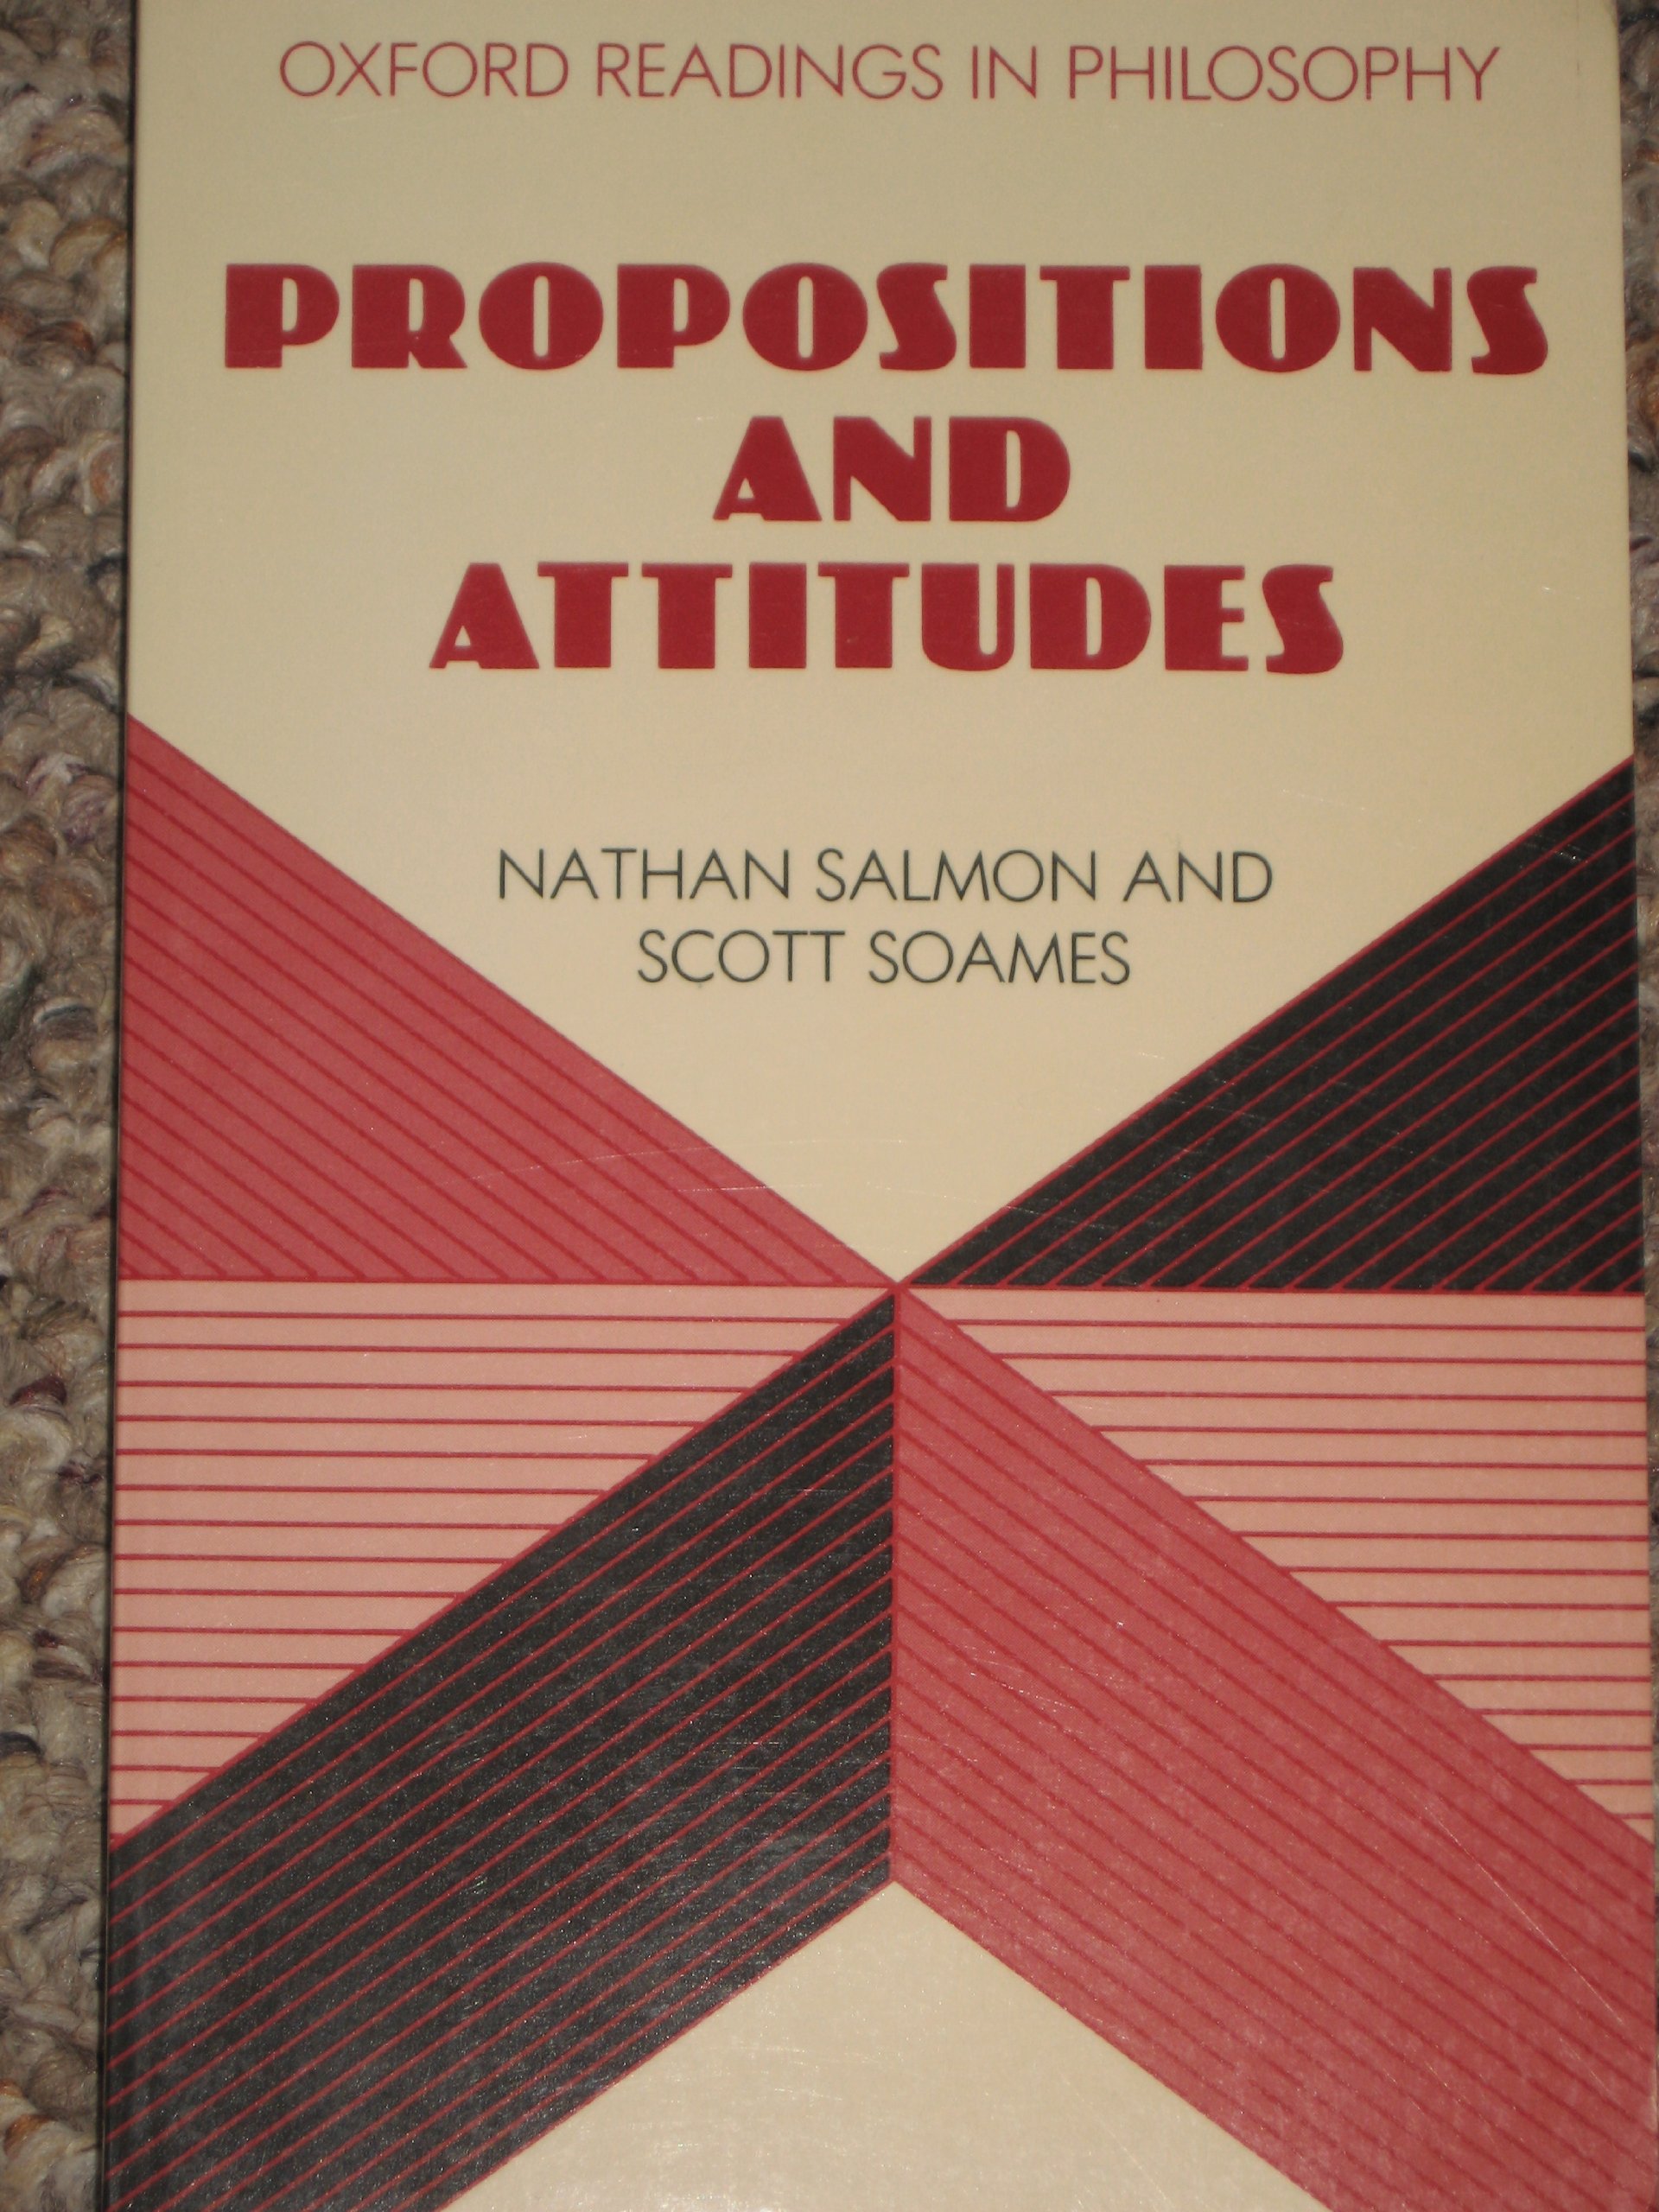 Propositions and attitudes magazine reviews